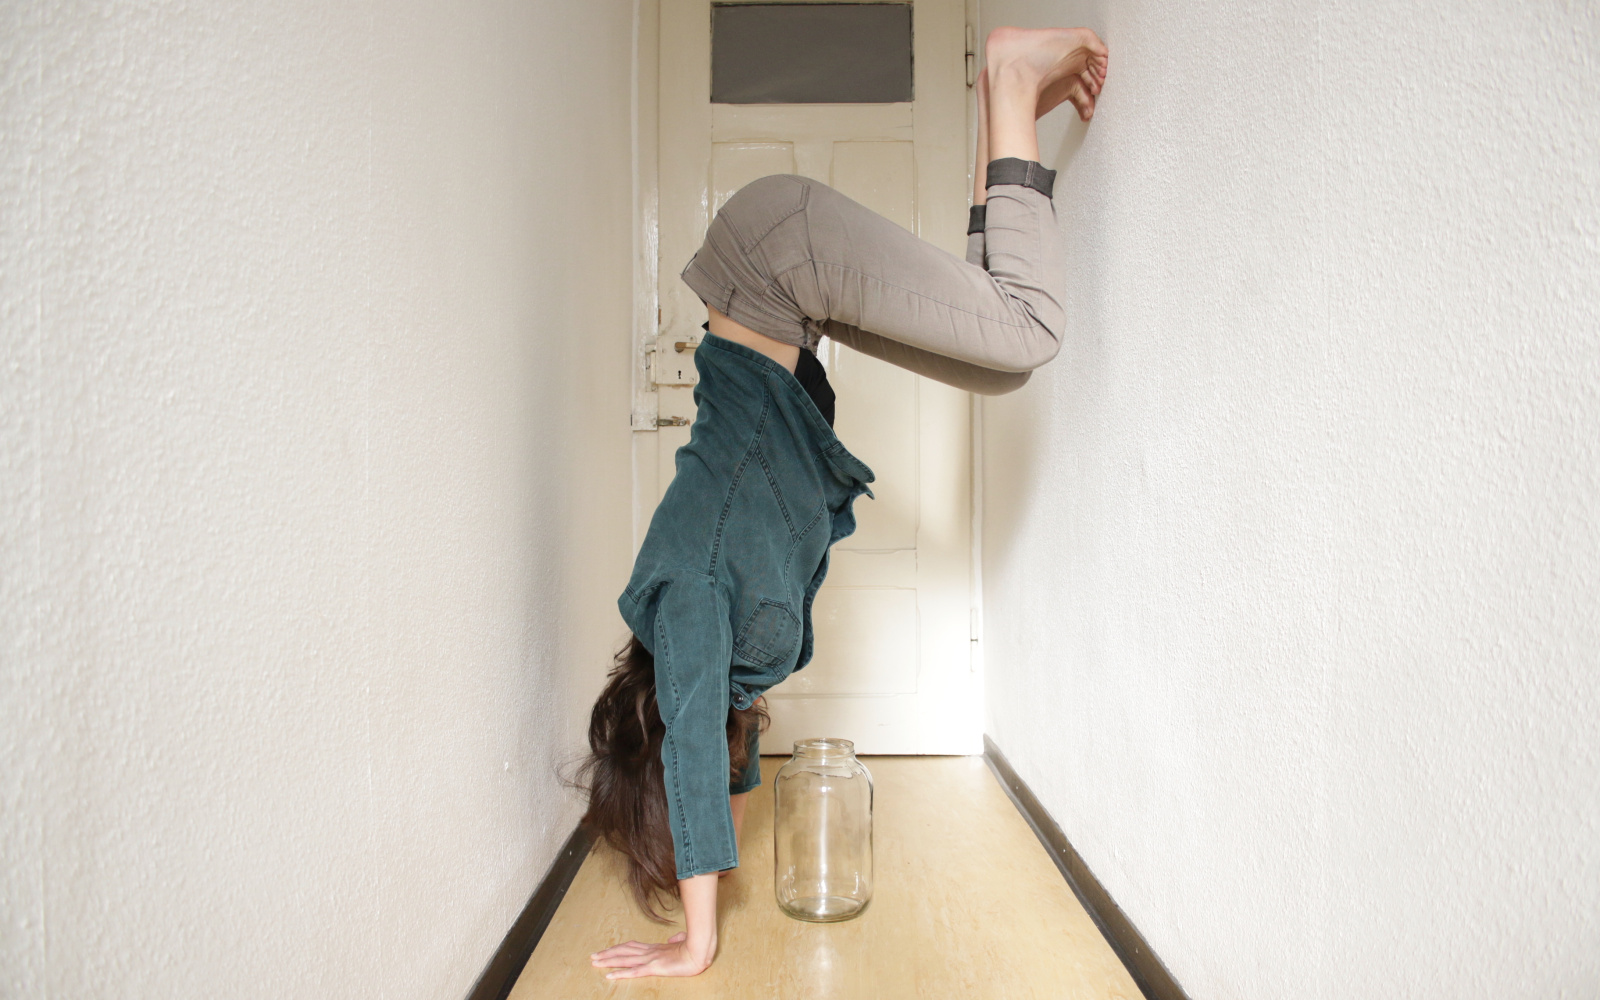 A person is doing a handstand against the wall in a small hallway, under her is an empty jar.